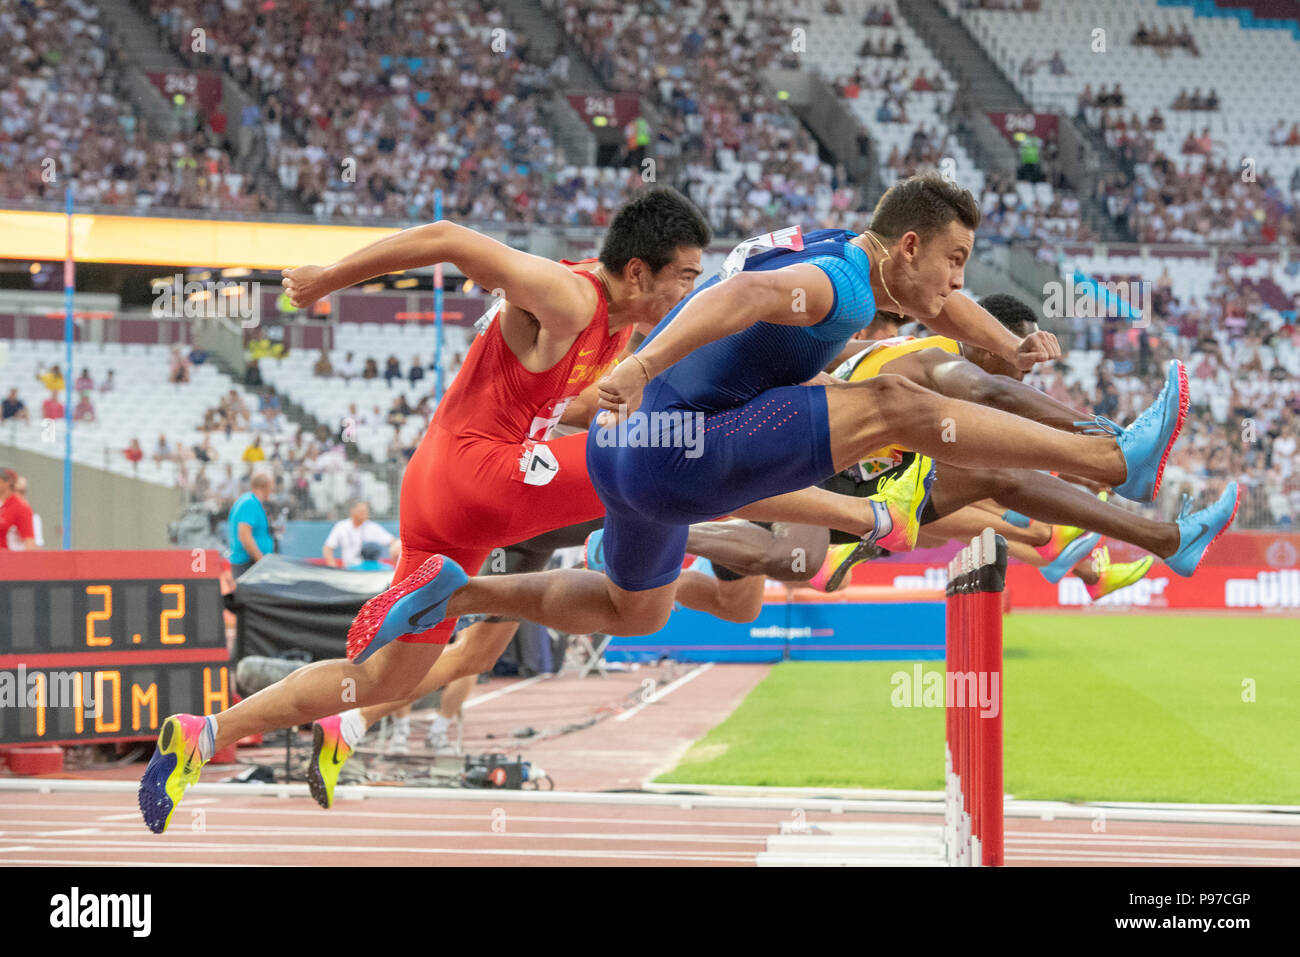 London, UK. 14th July 2018. Devon Allen (USA) clears a barrier during the 110m Hurdles at the Athletics World Cup  at the London Stadium, London, Great Britiain, on 14 July 2018. Credit: Andrew Peat/Alamy Live News Stock Photo